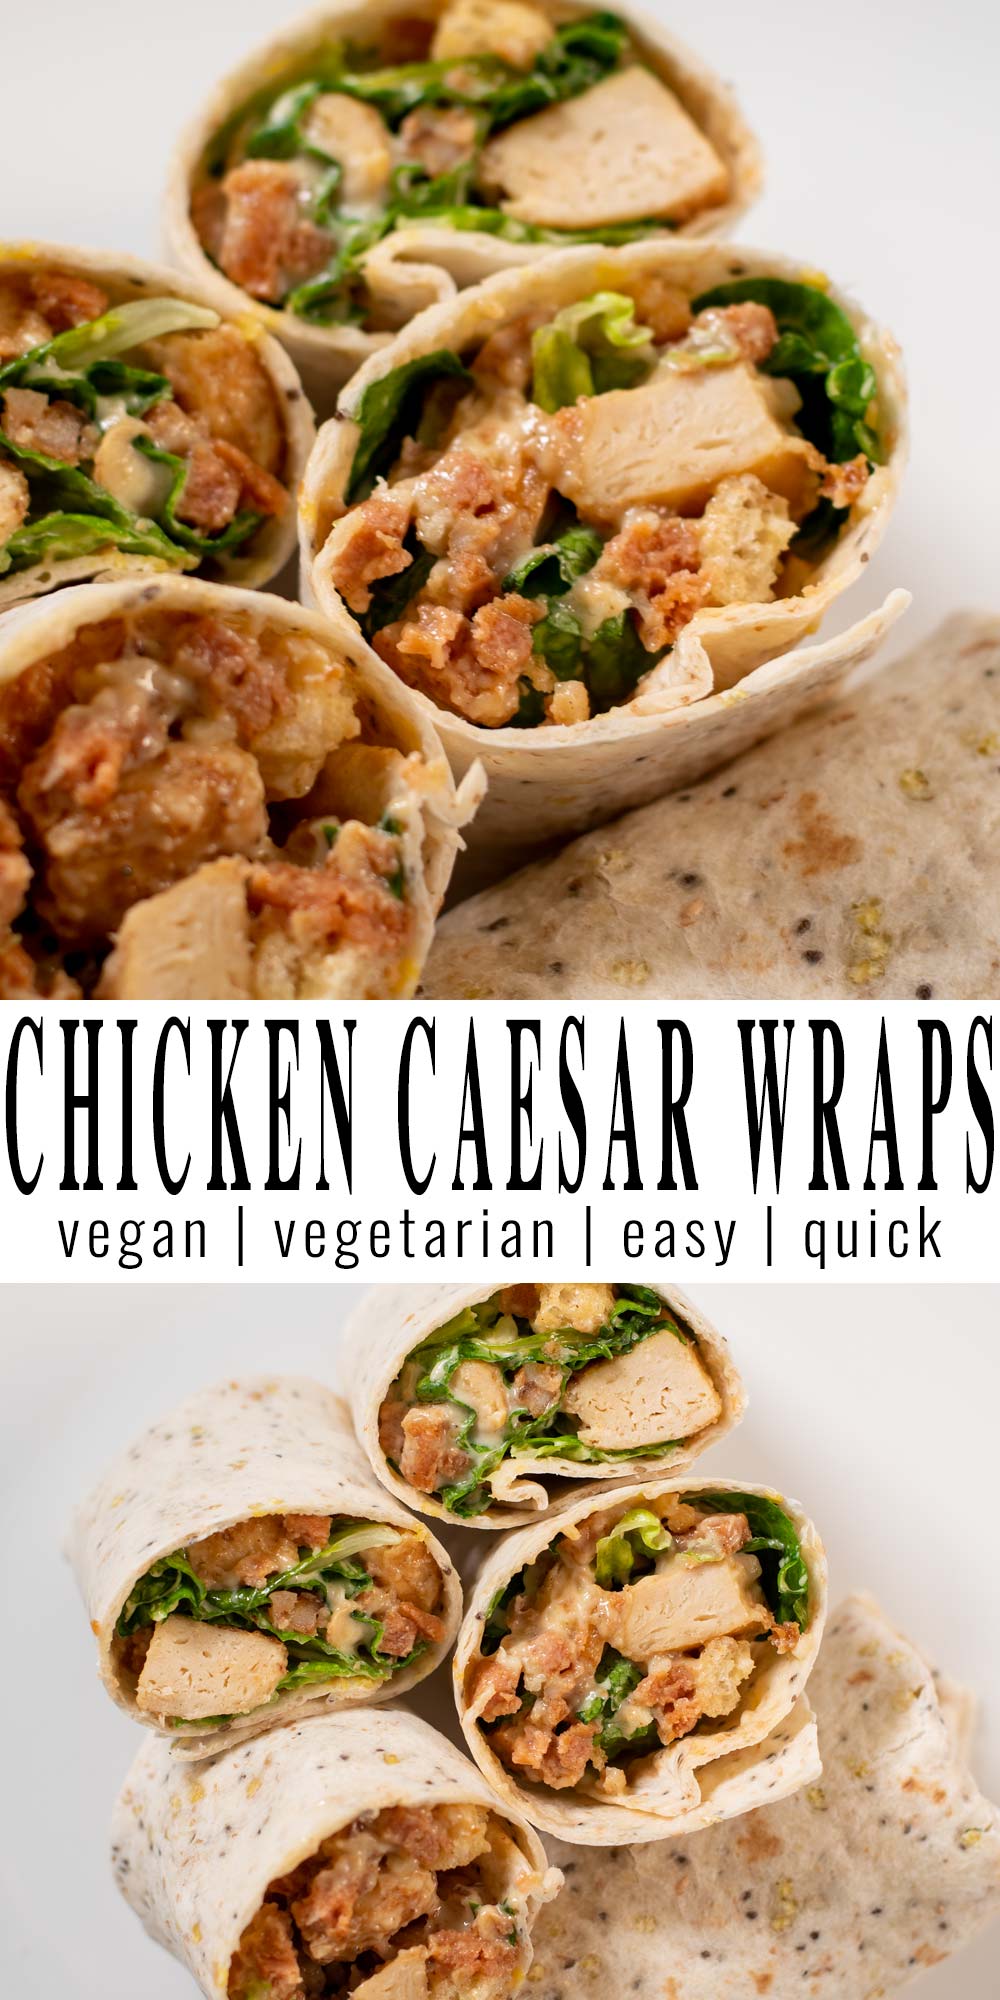 Collage of two photos of Chicken Caesar Wraps with recipe title text.